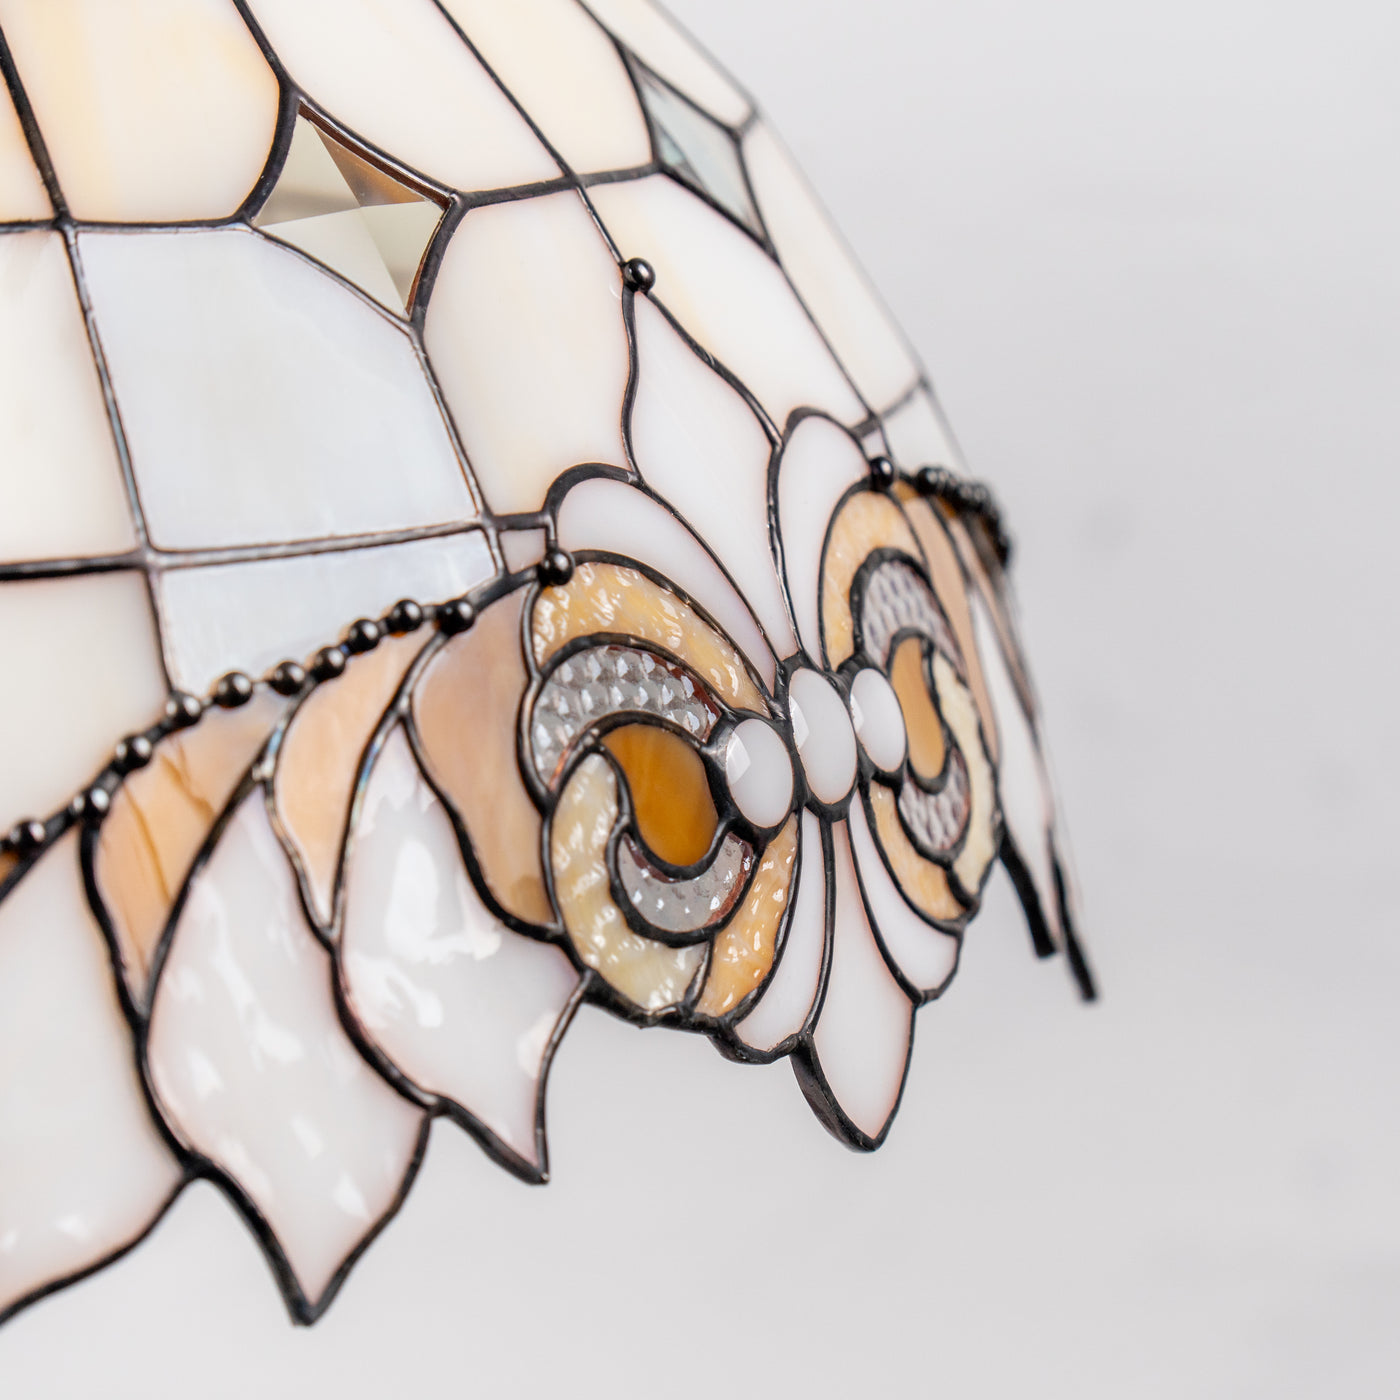 handcrafted lamp with white inserts made of stained glass